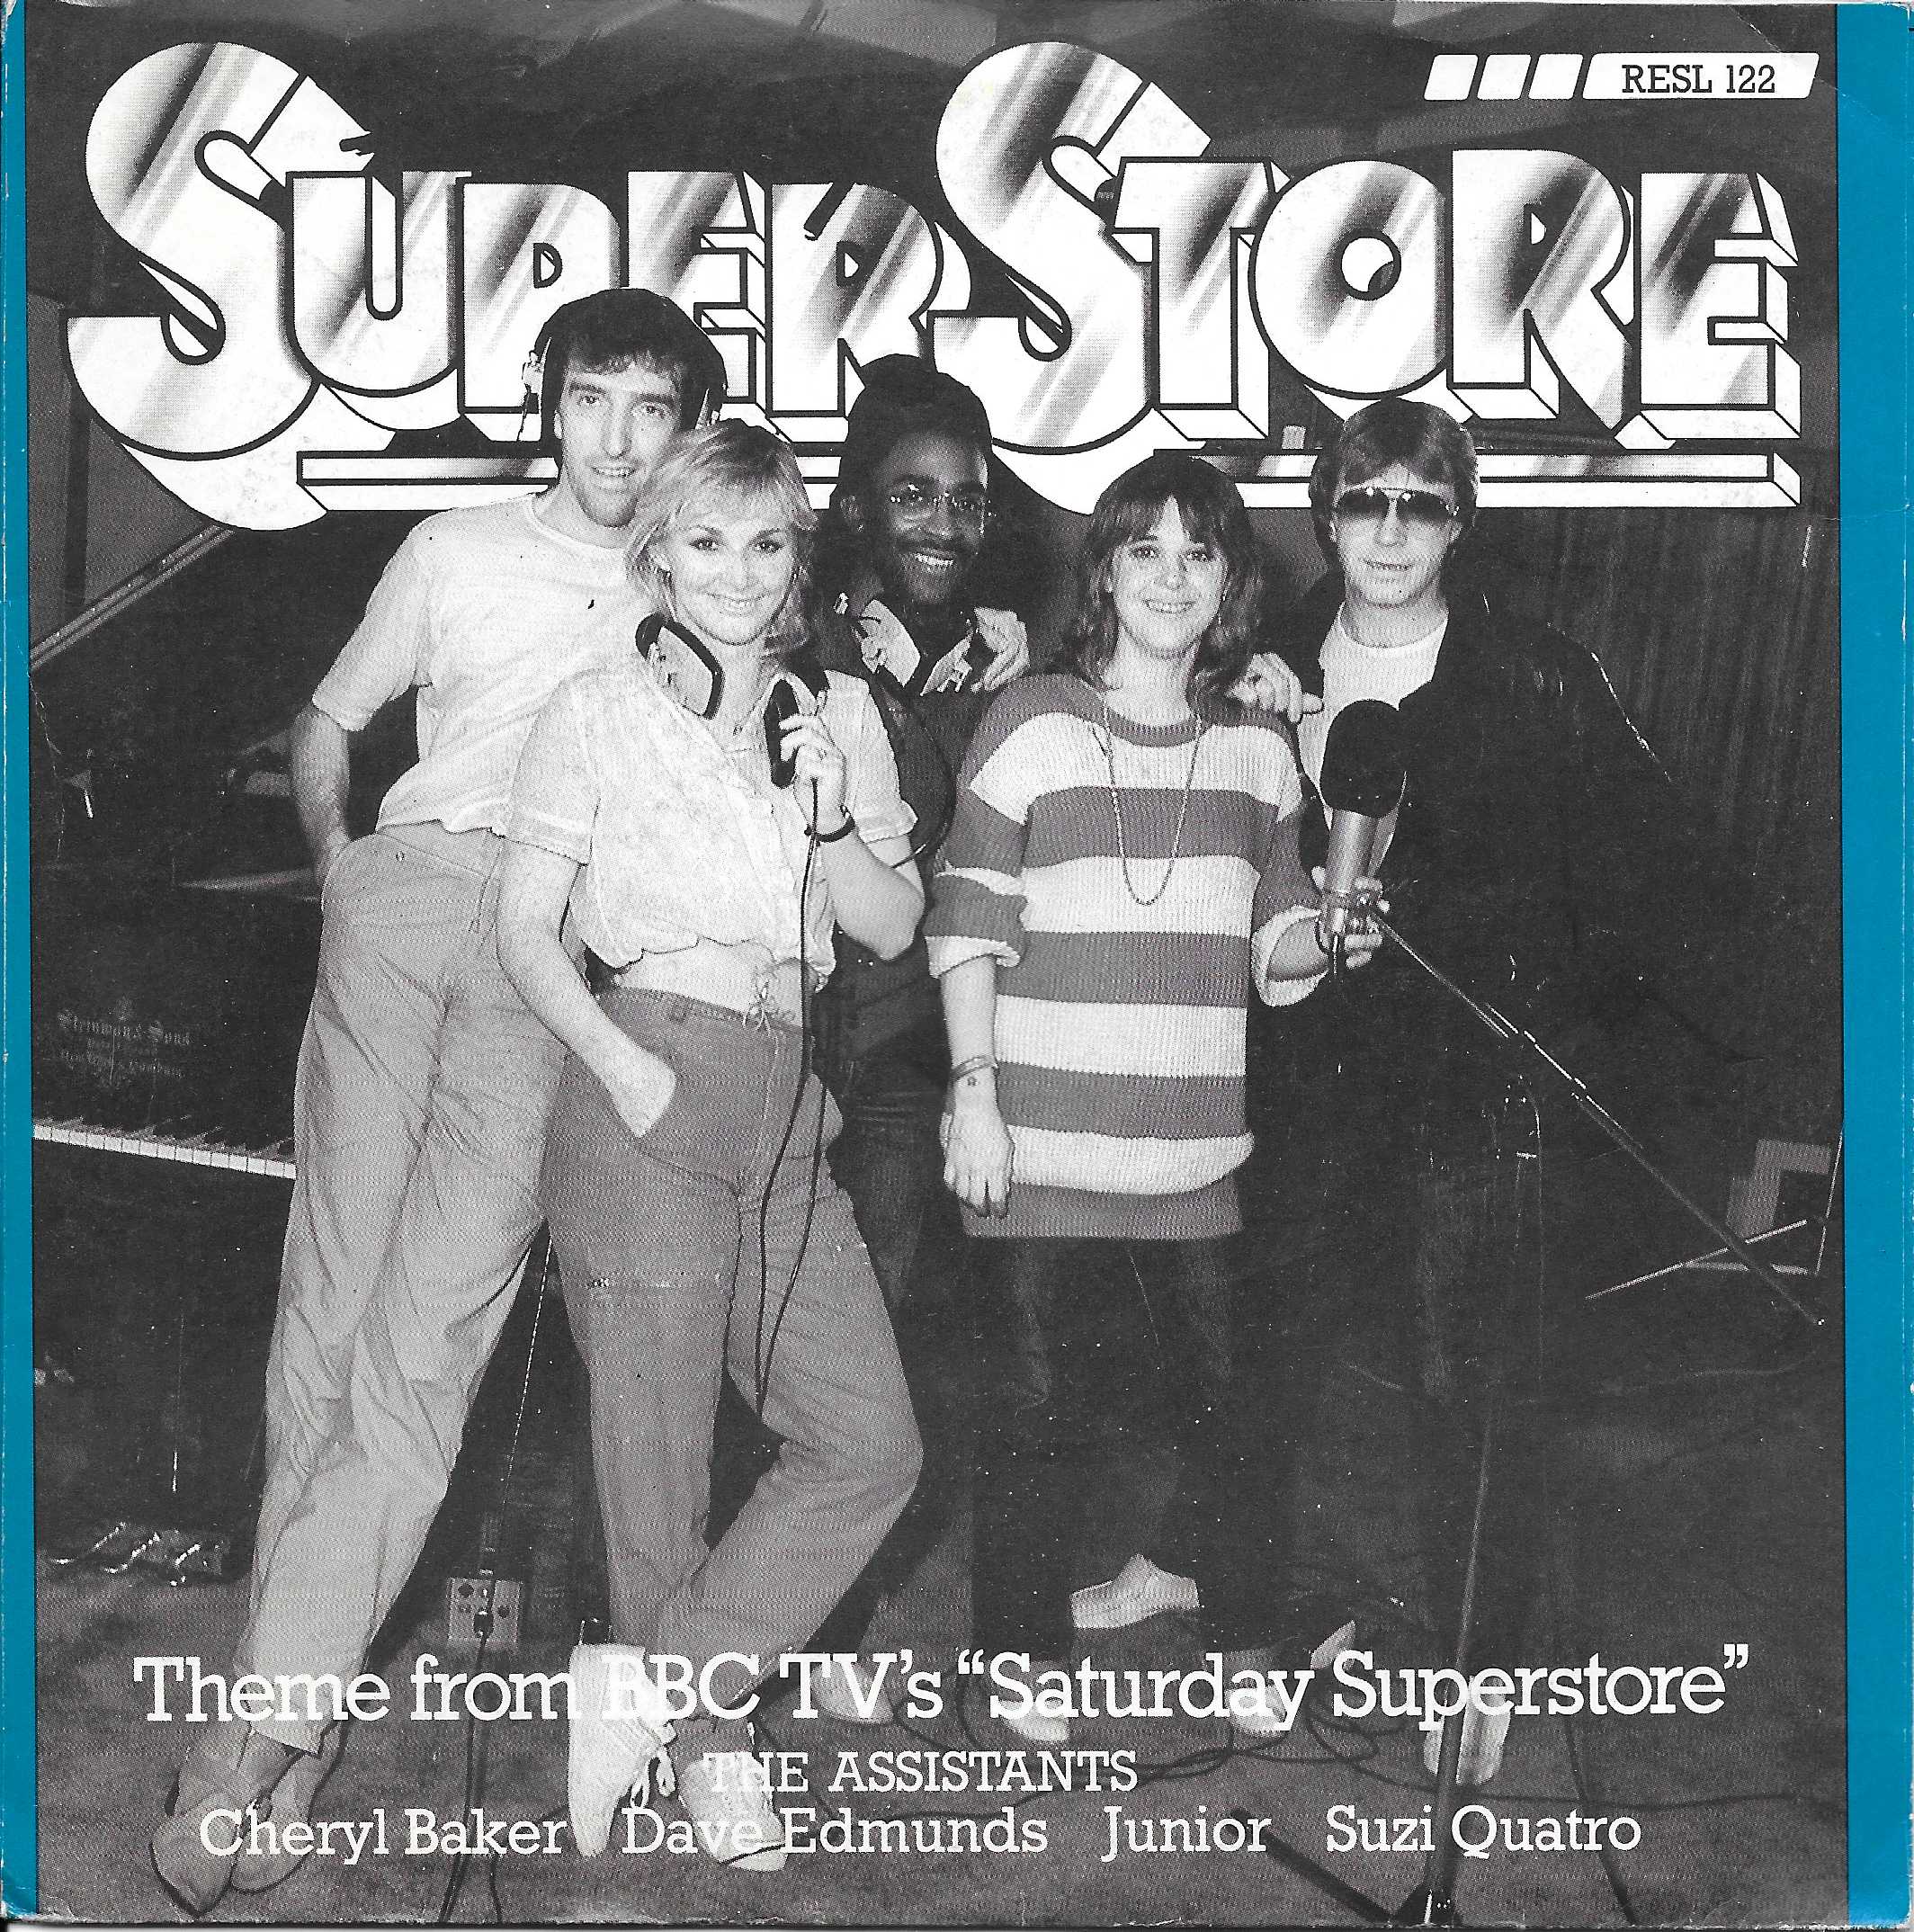 Picture of RESL 122-iD Down at the superstore (Saturday superstore) by artist B. A. Robertson from the BBC singles - Records and Tapes library